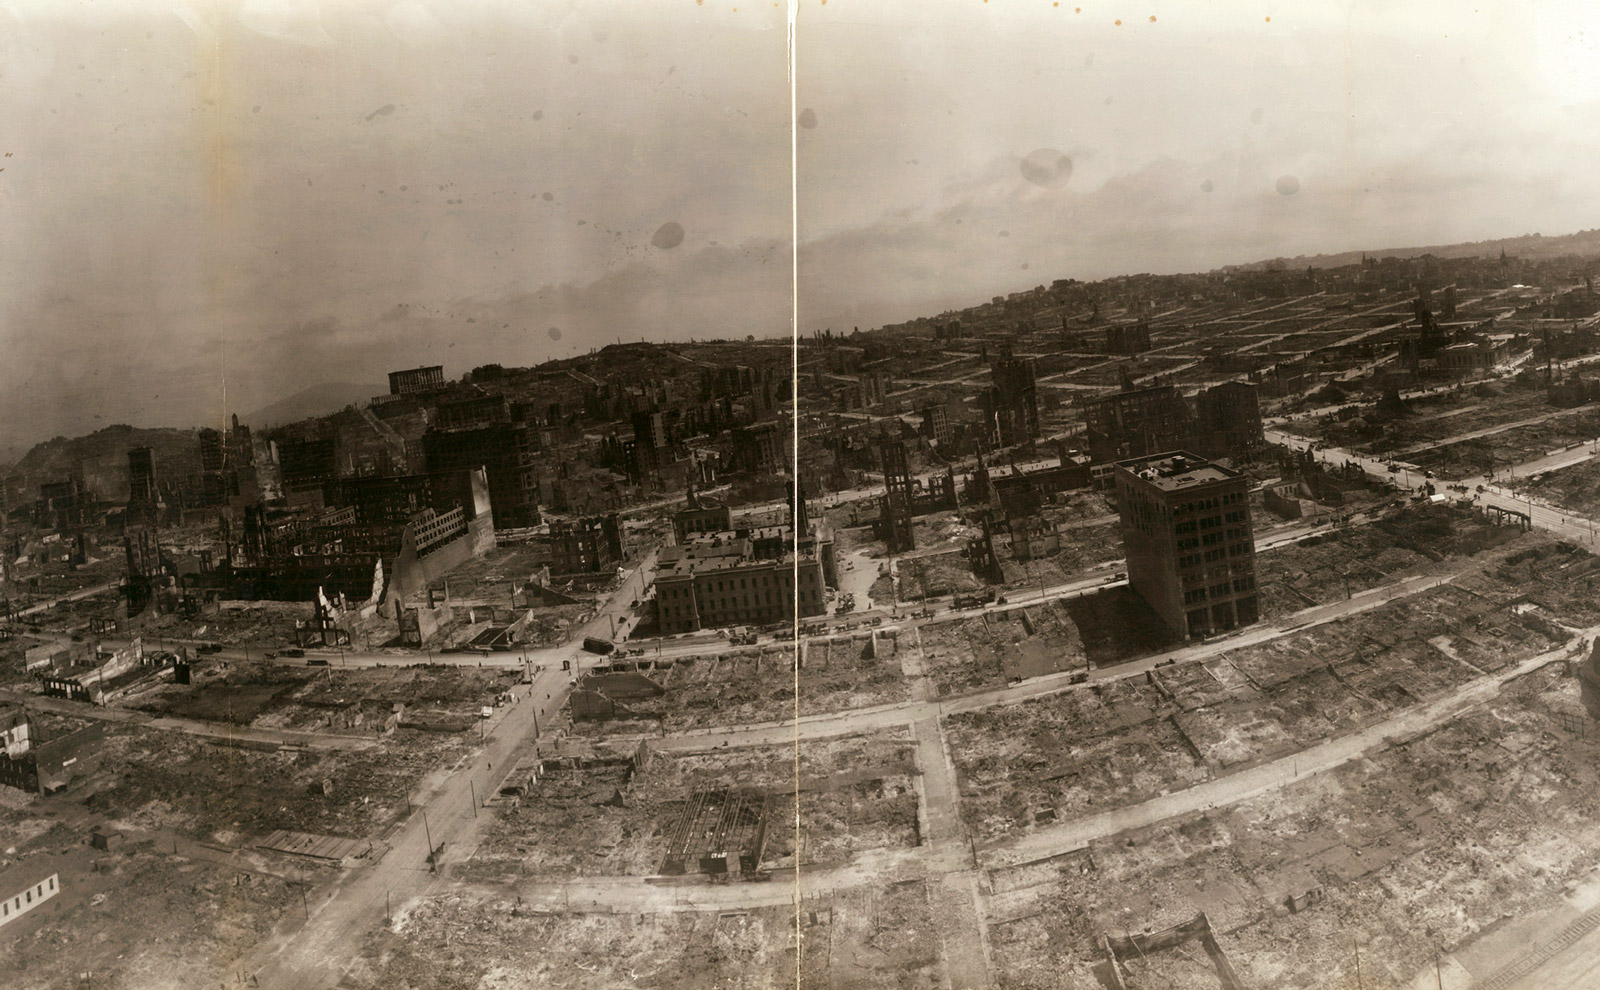 A 1906 aerial panoramic photograph taken by George R. Lawrence which shows San Francisco in ruins after the fire of the same year.